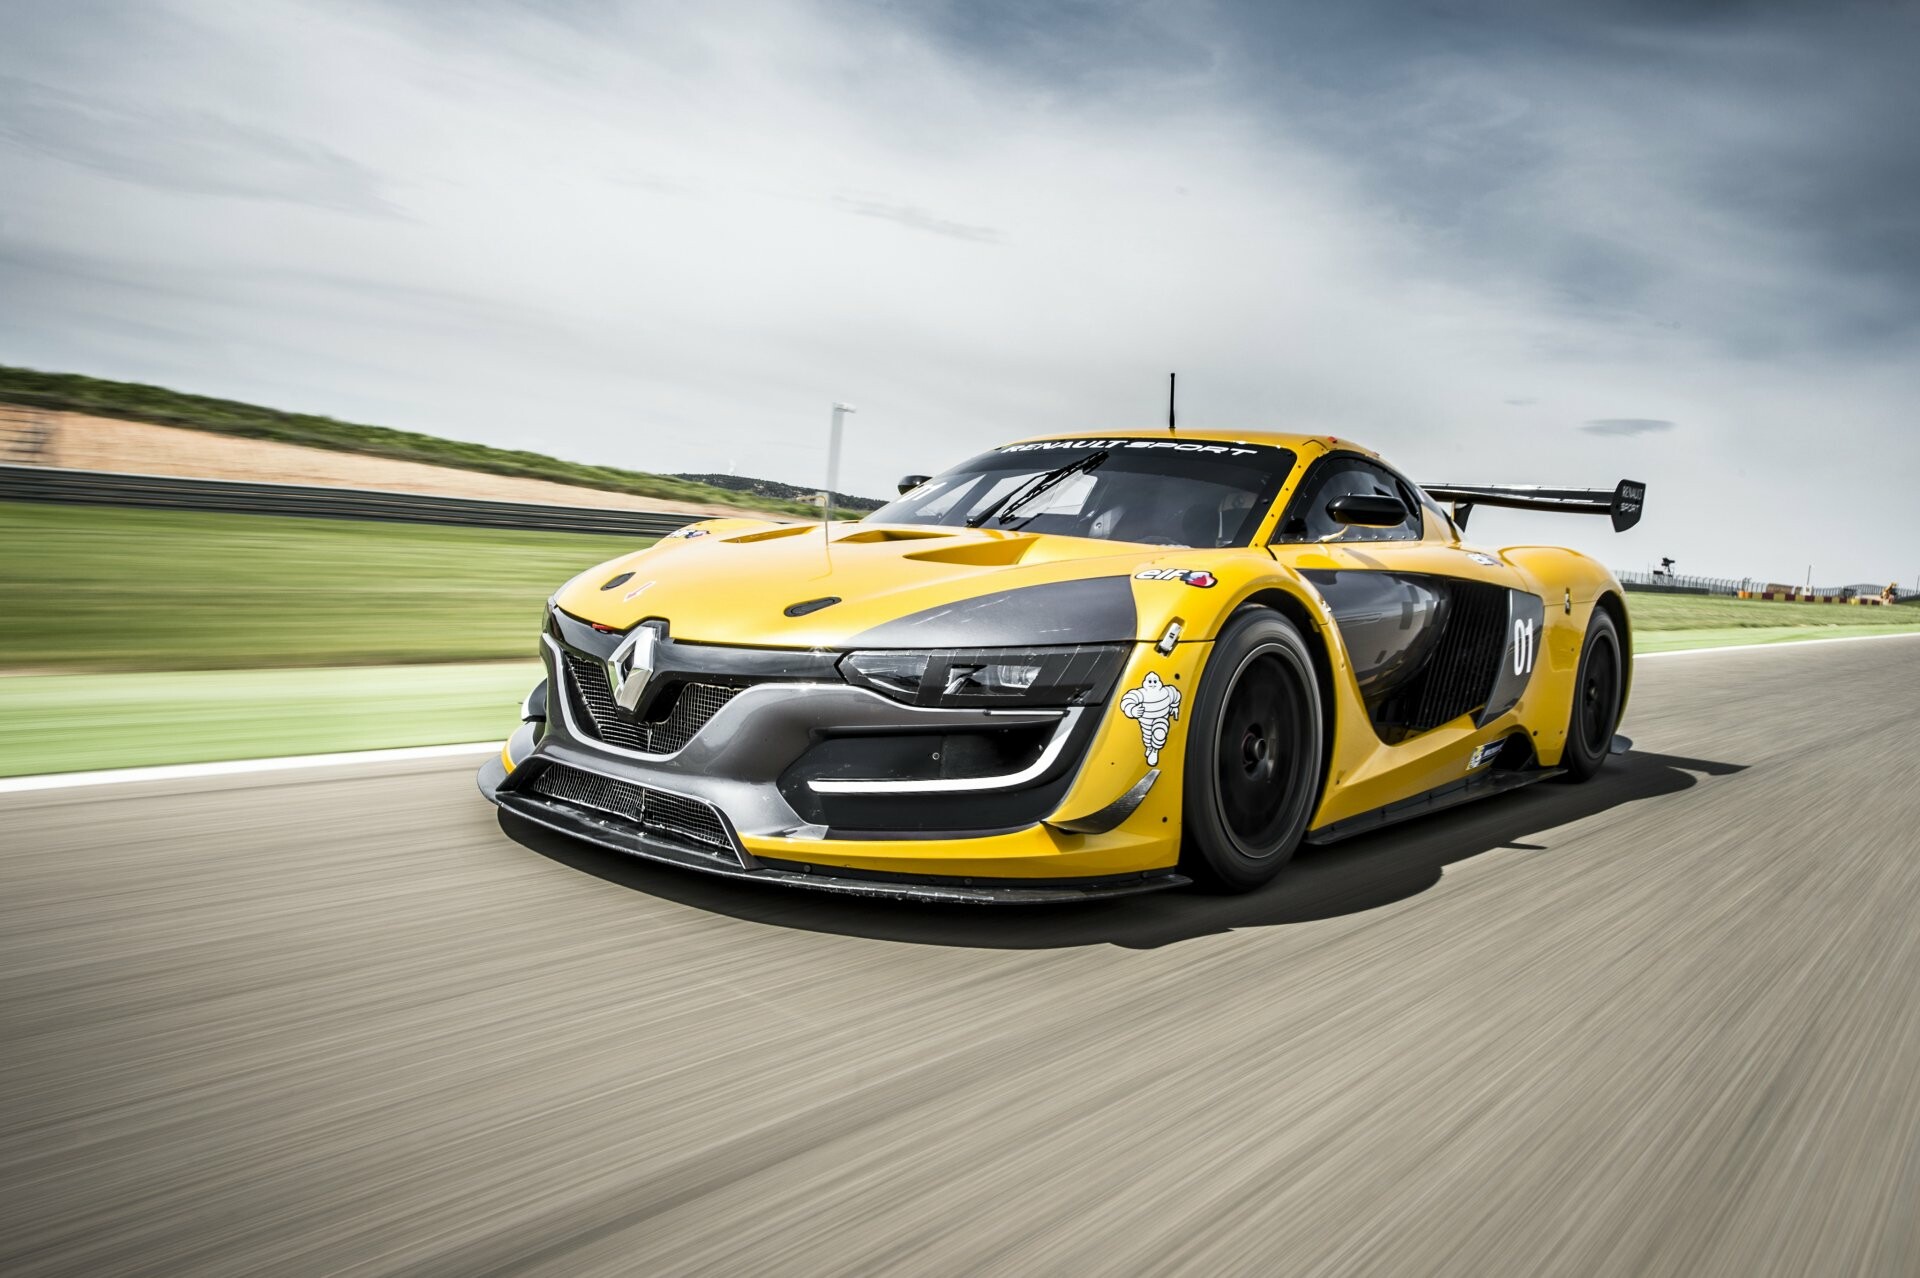 Renault: Renault R.S.01, Dallara-developed carbon fiber chassis and the 3.8-litre twin-turbo V6. 1920x1280 HD Wallpaper.